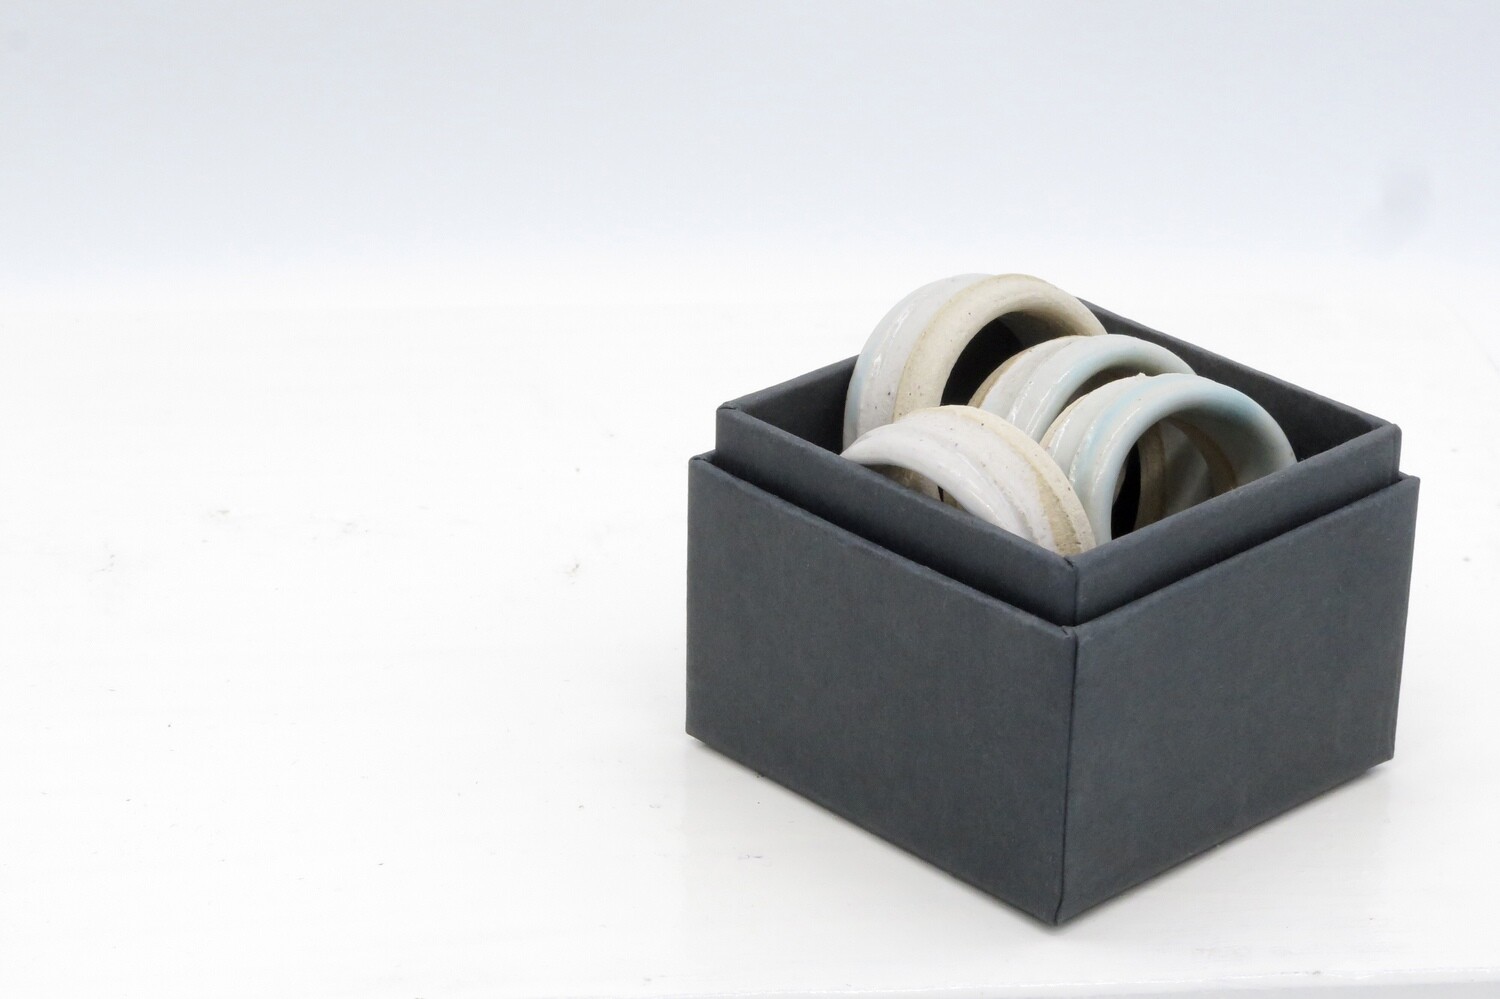 Napkin rings - set of 4 pale green napkin rings in a gift box.